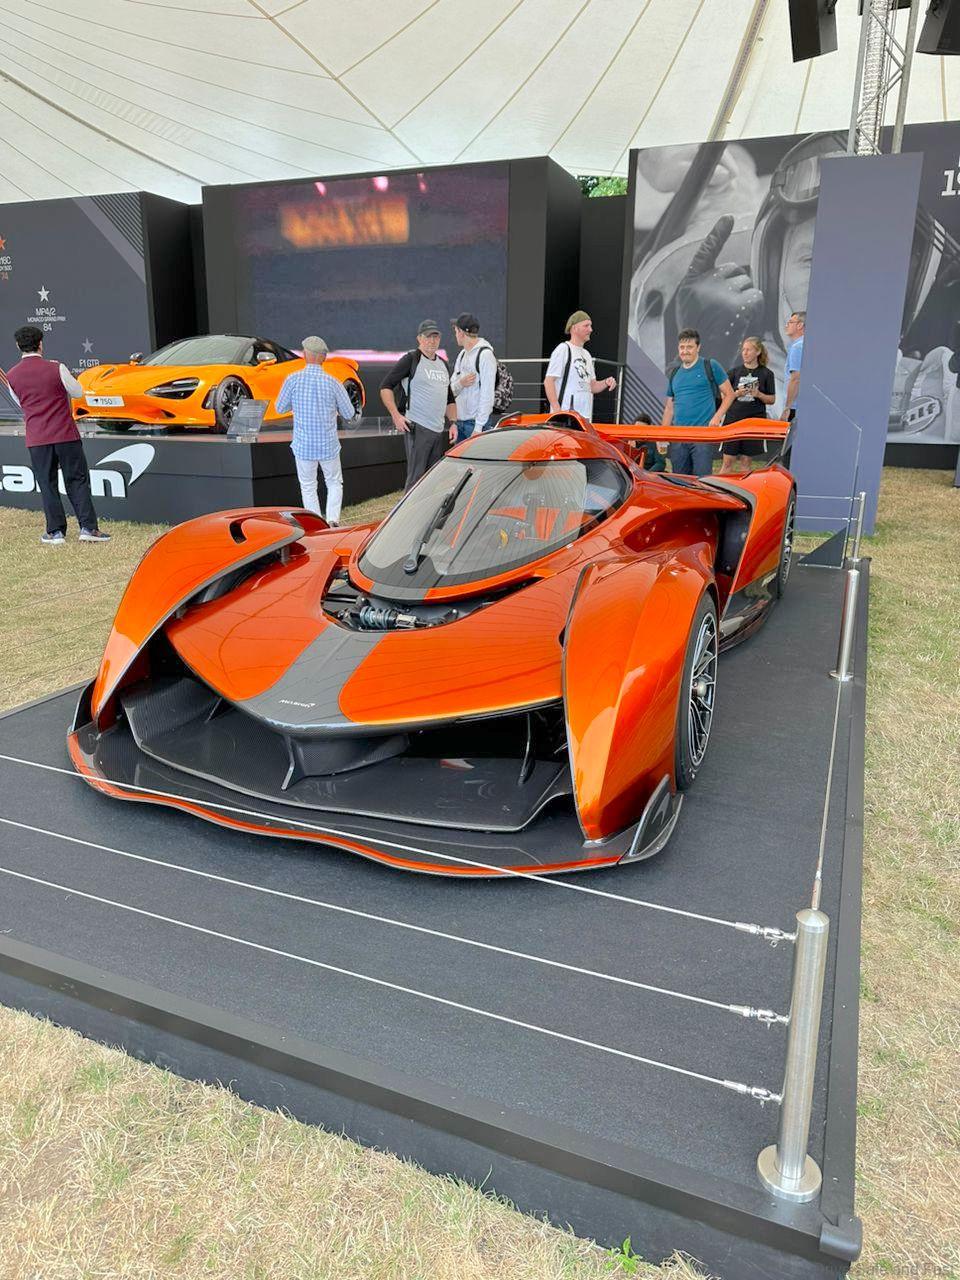 Goodwood Festival of Speed Future Cars And Super Cars Pics